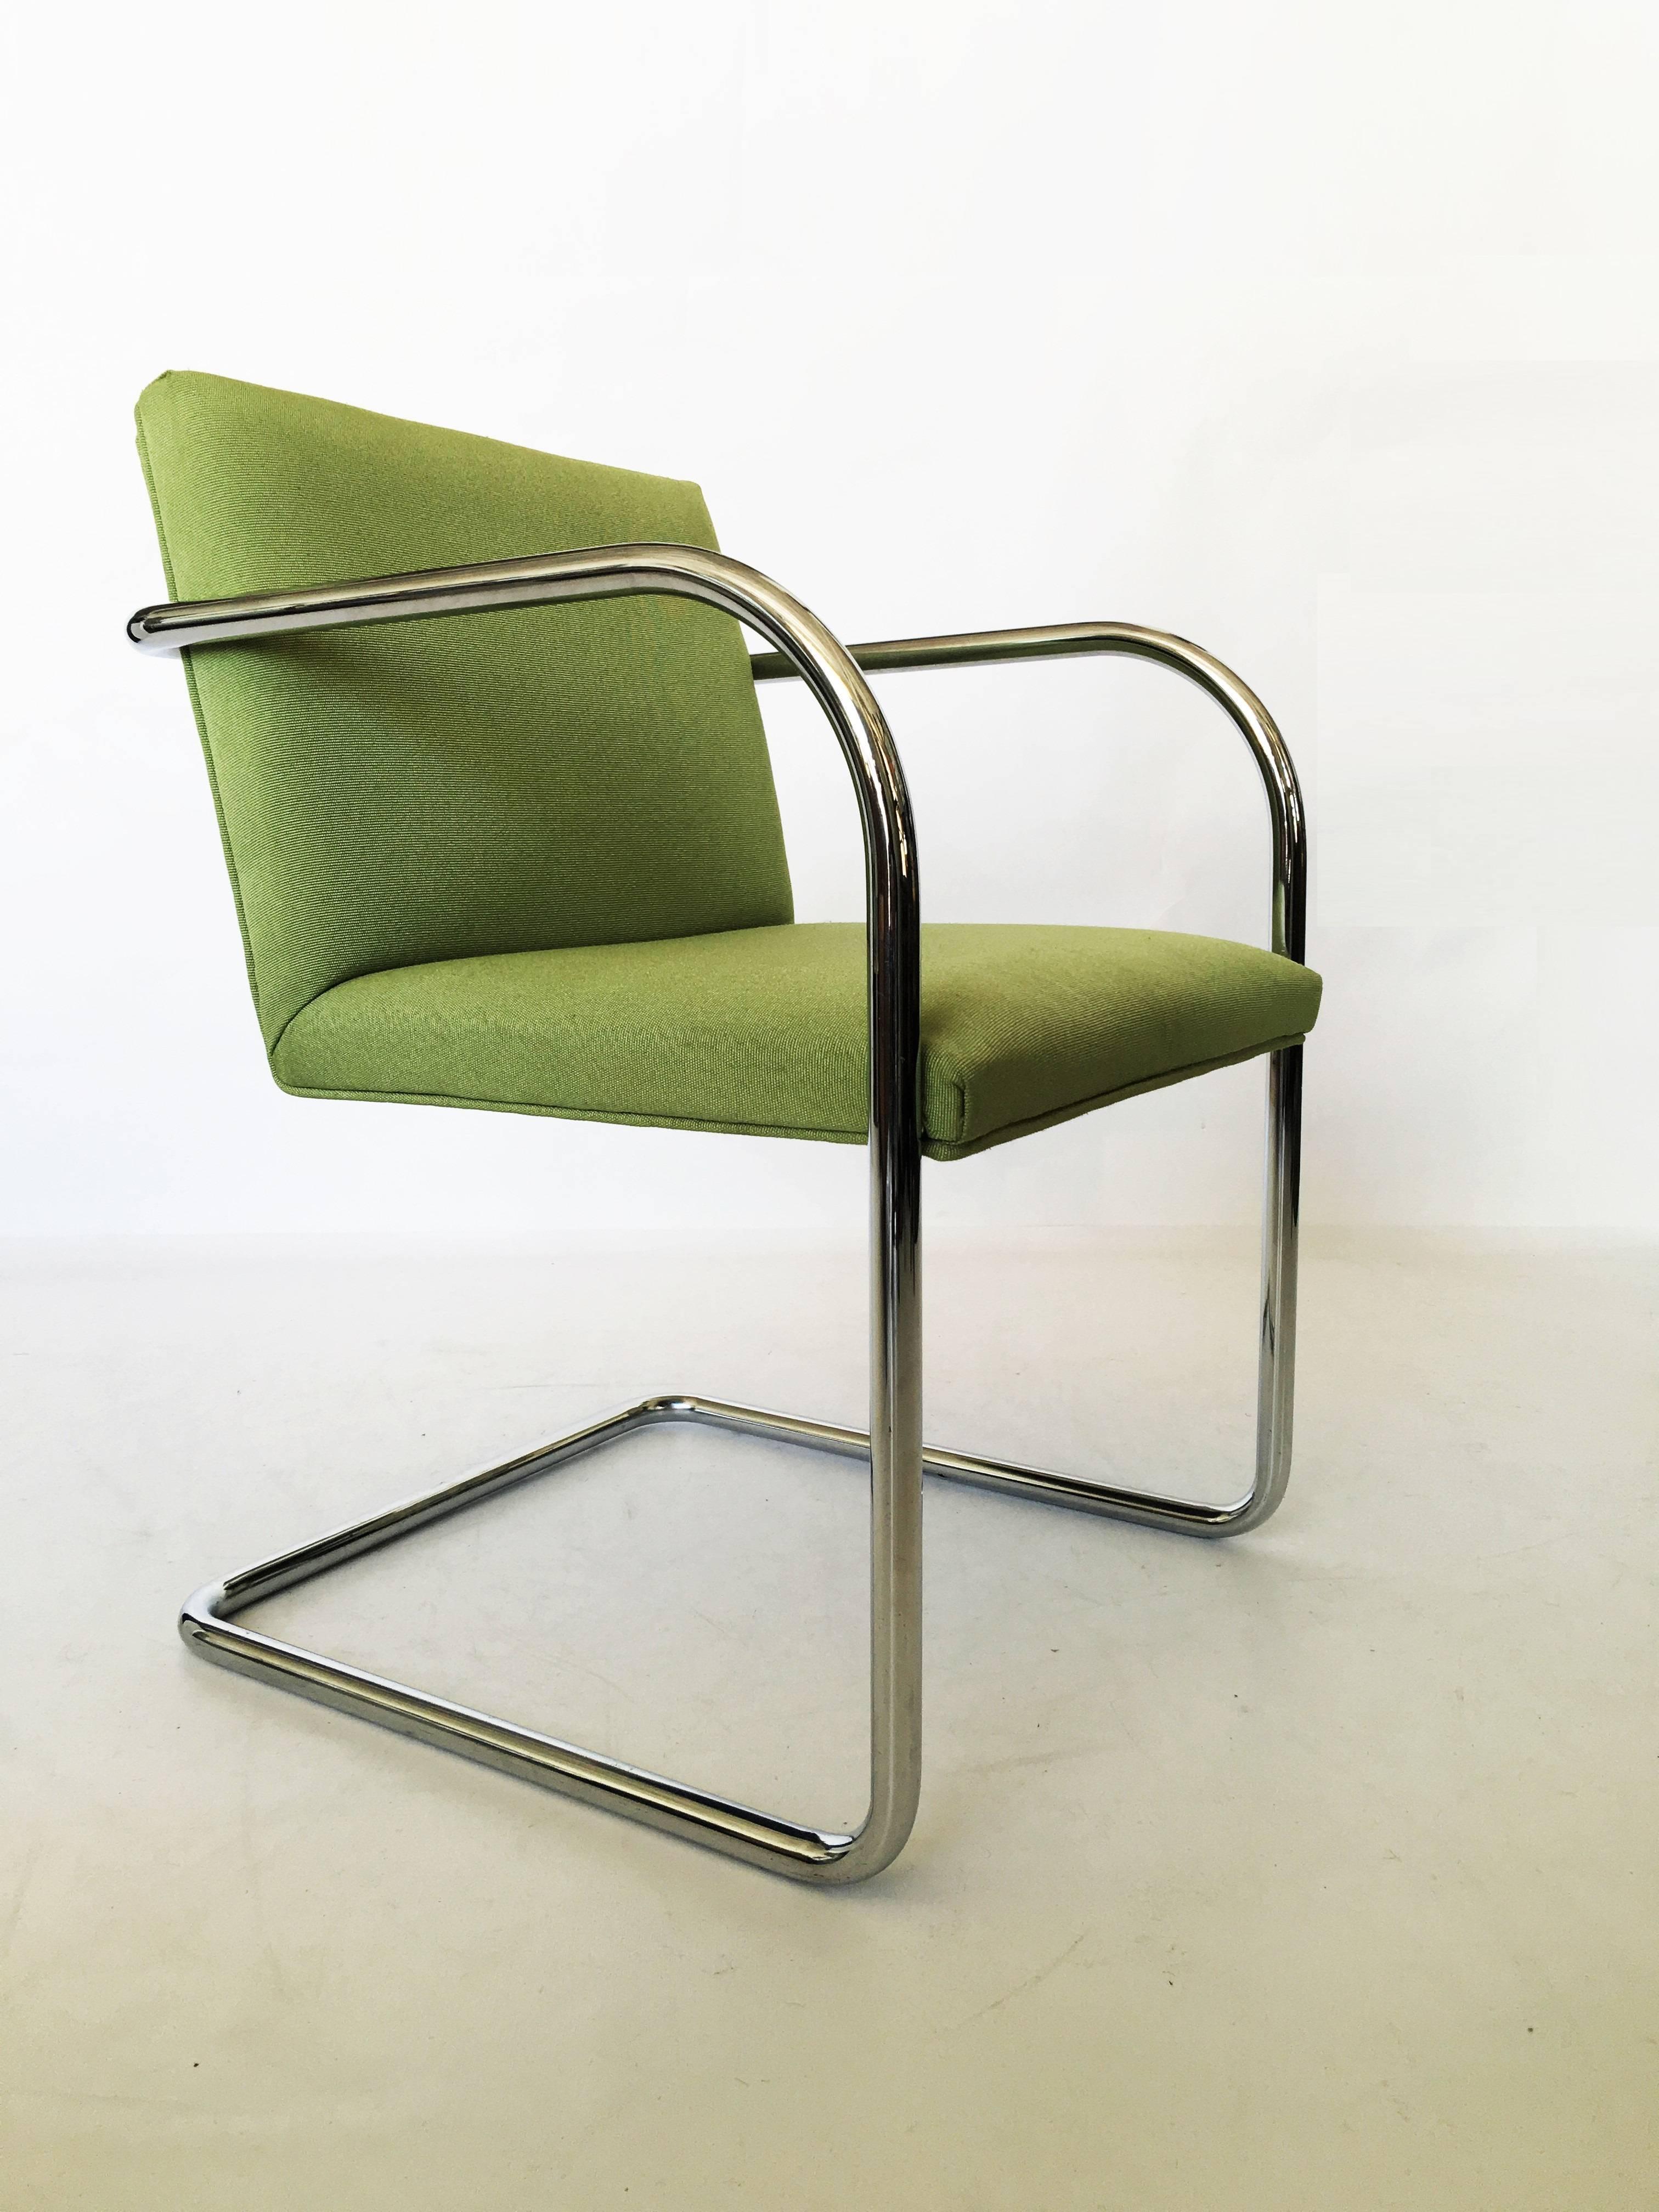 Beautiful pair of Brno chairs. The cantilevered frame is a single piece of tubular chromed steel. Seats are in their original green upholstery. Original vintage condition upholstery is recommended. Can be reupholstered in your choice of fabric.